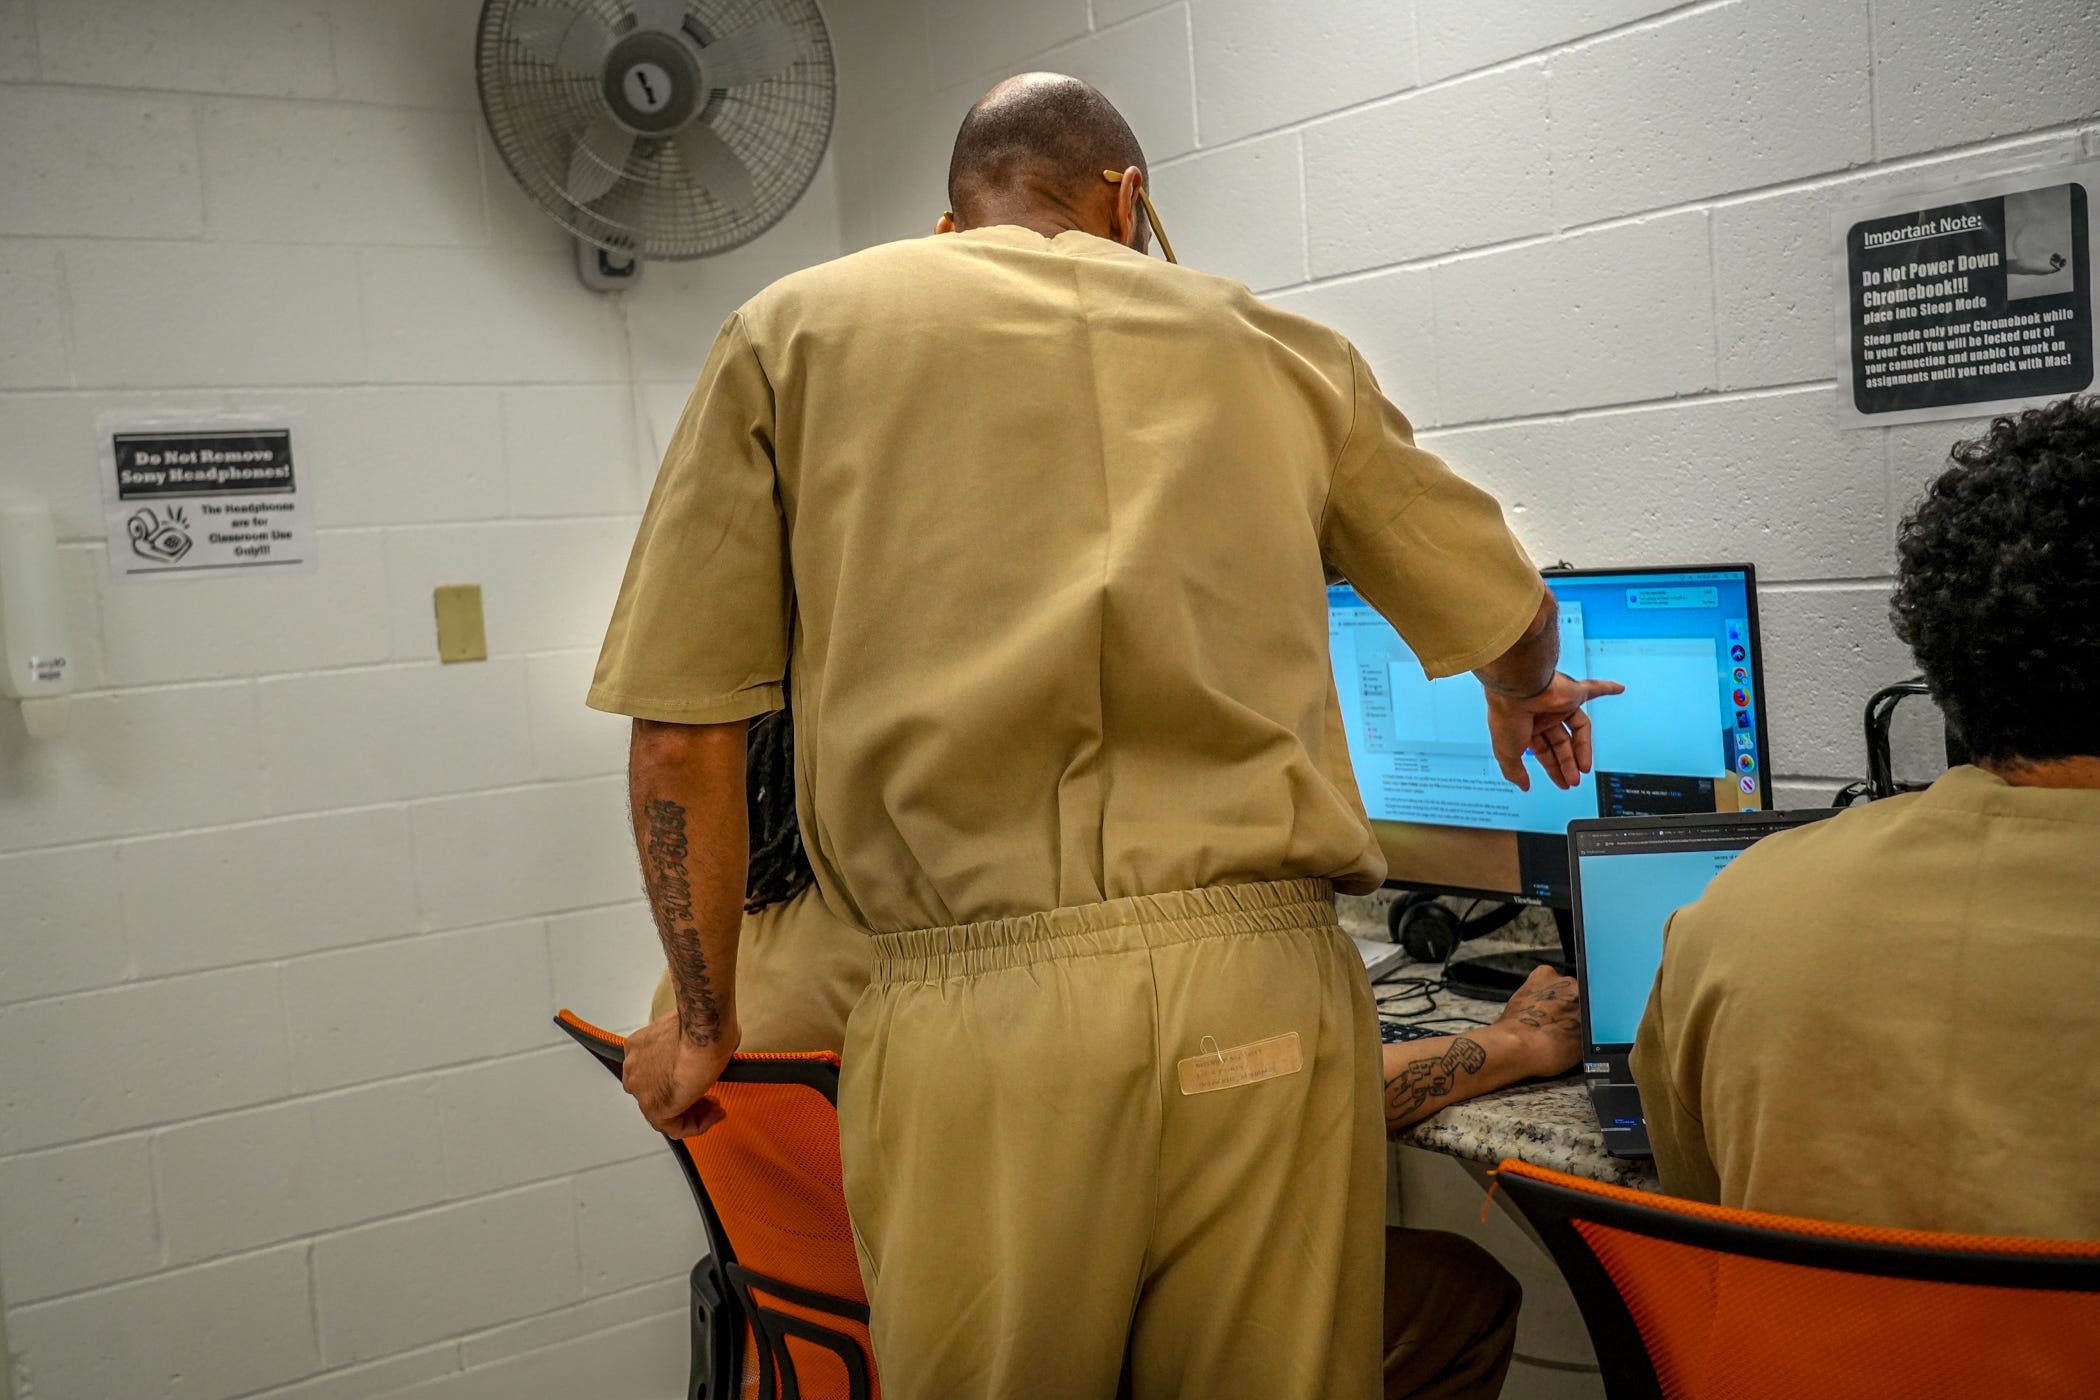 'This is my last chance': How an ACI program wants to lift people from prison to tech jobs